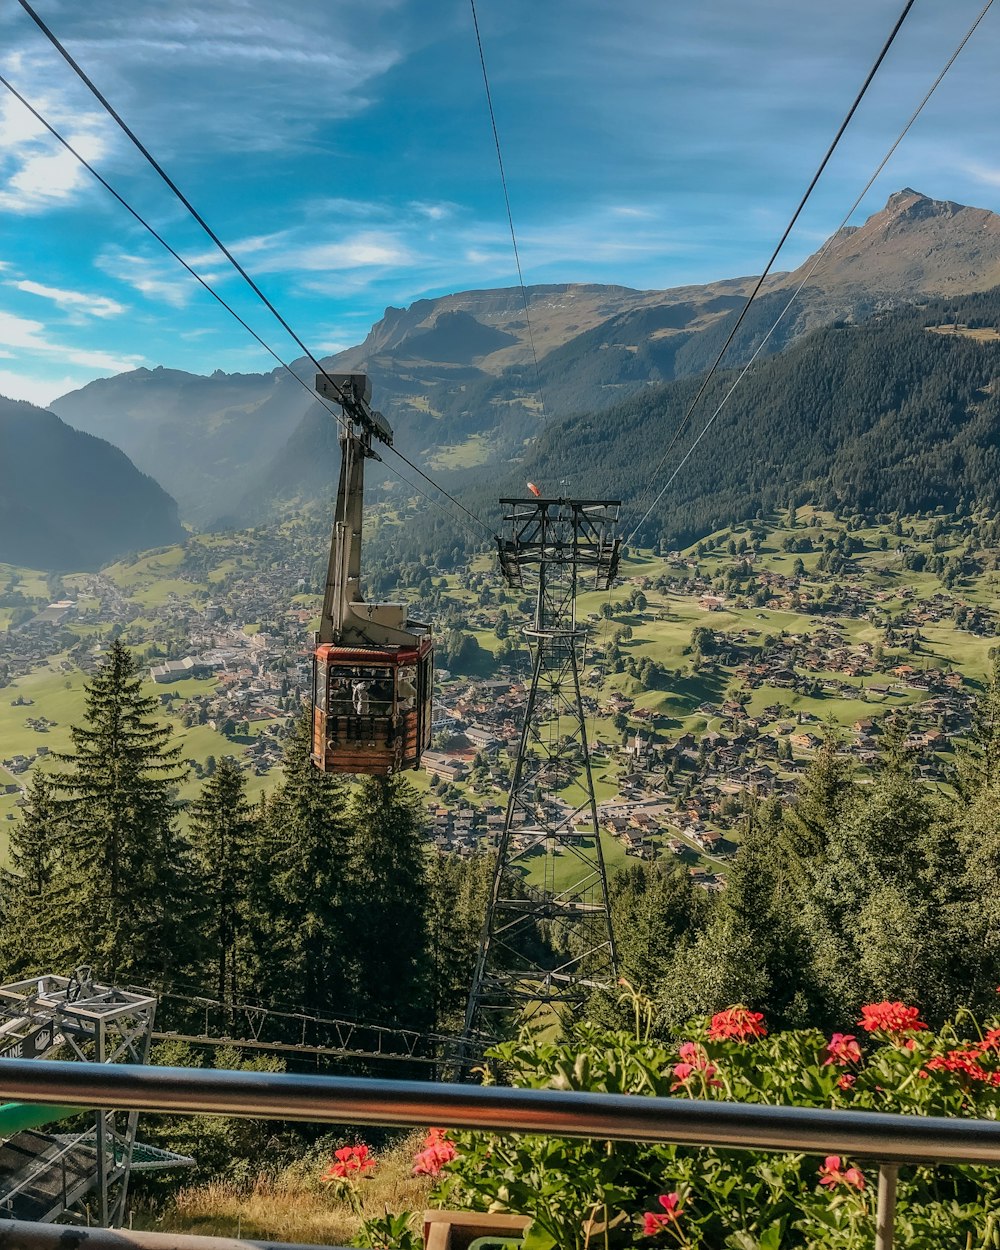 a view of a mountain town from a cable car